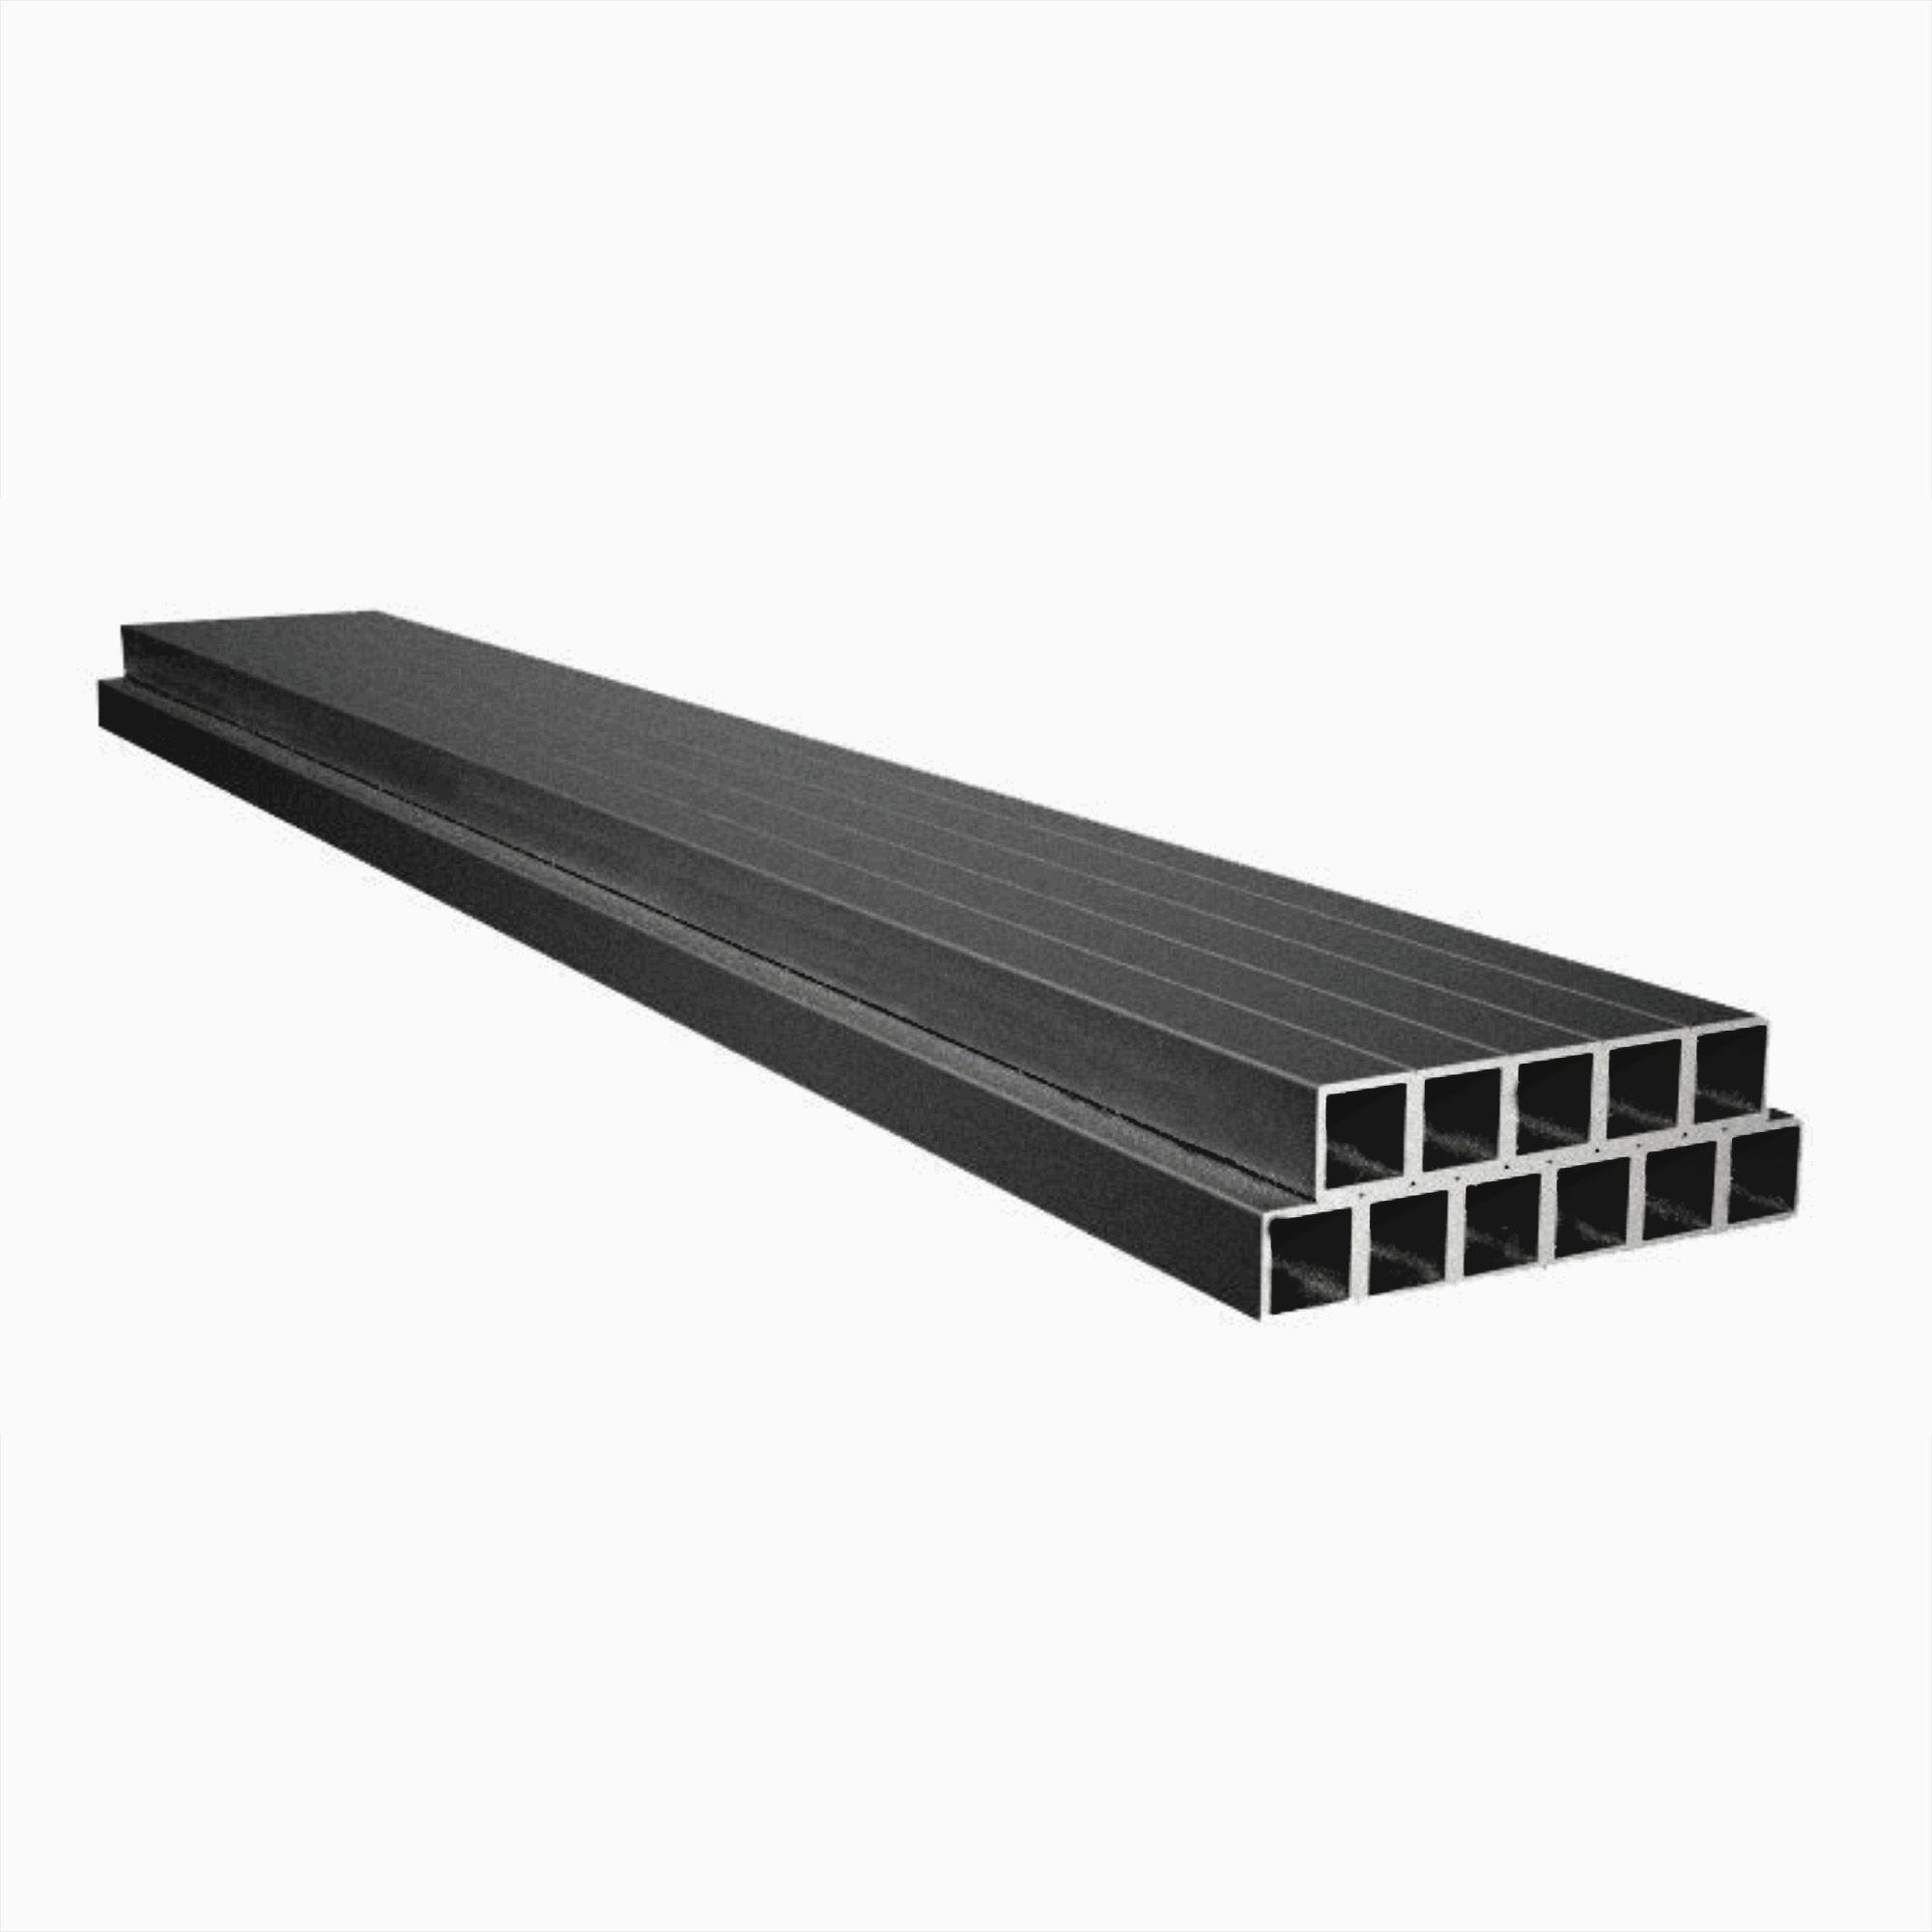 4' Century Pickets for 36" Stair Rail, Black